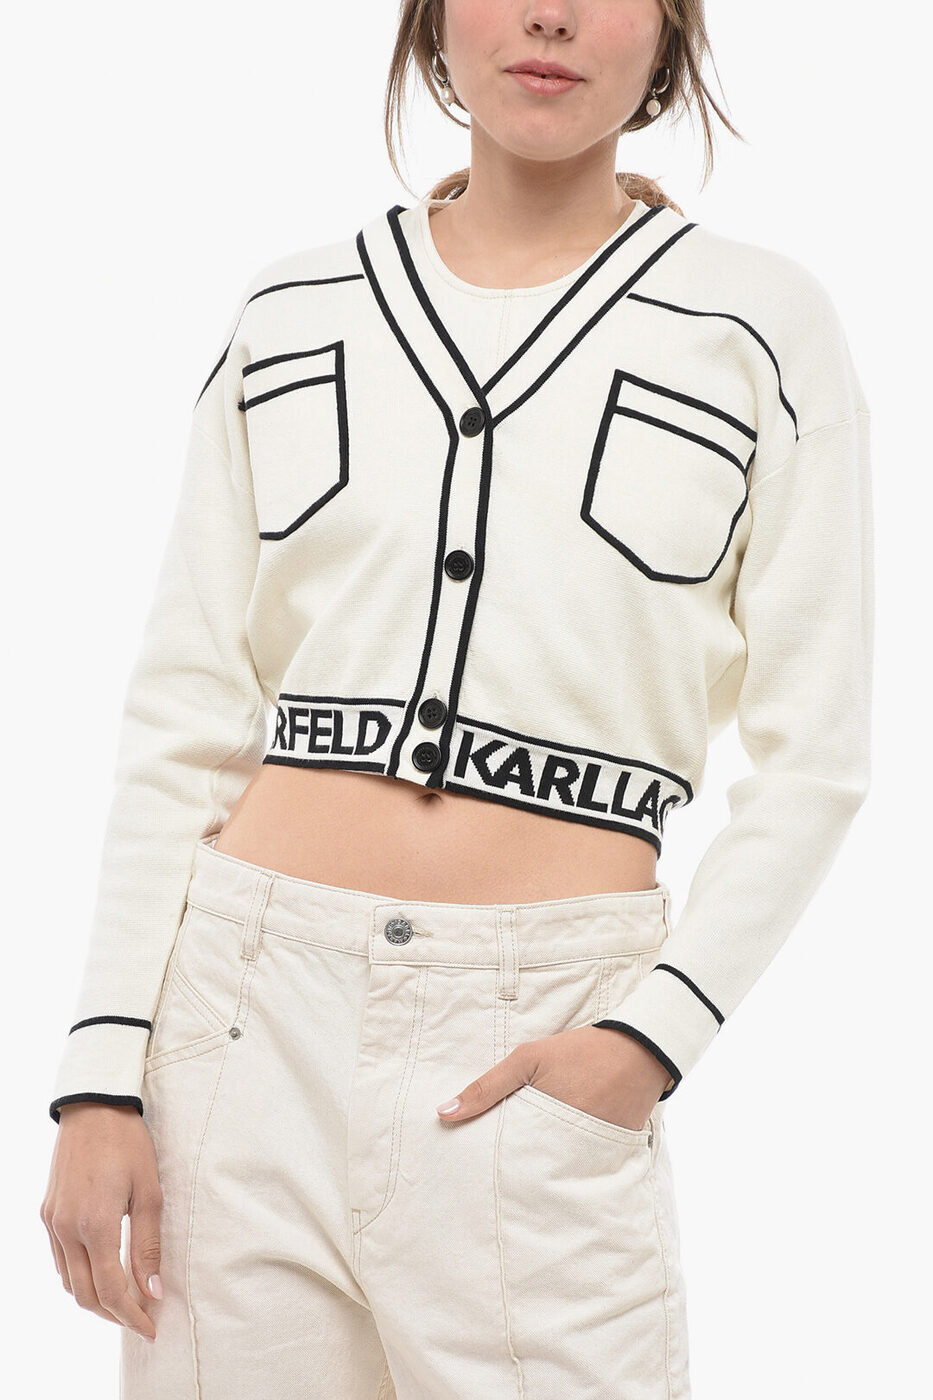 KARL LAGERFELD カール ラガーフェルド ニットウェア 231W2011101 レディース COTTON BLEND CROPPED CARDIGAN WITH DOUBLE BREAST POCKET AND 【関税・送料無料】【ラッピング無料】 dk